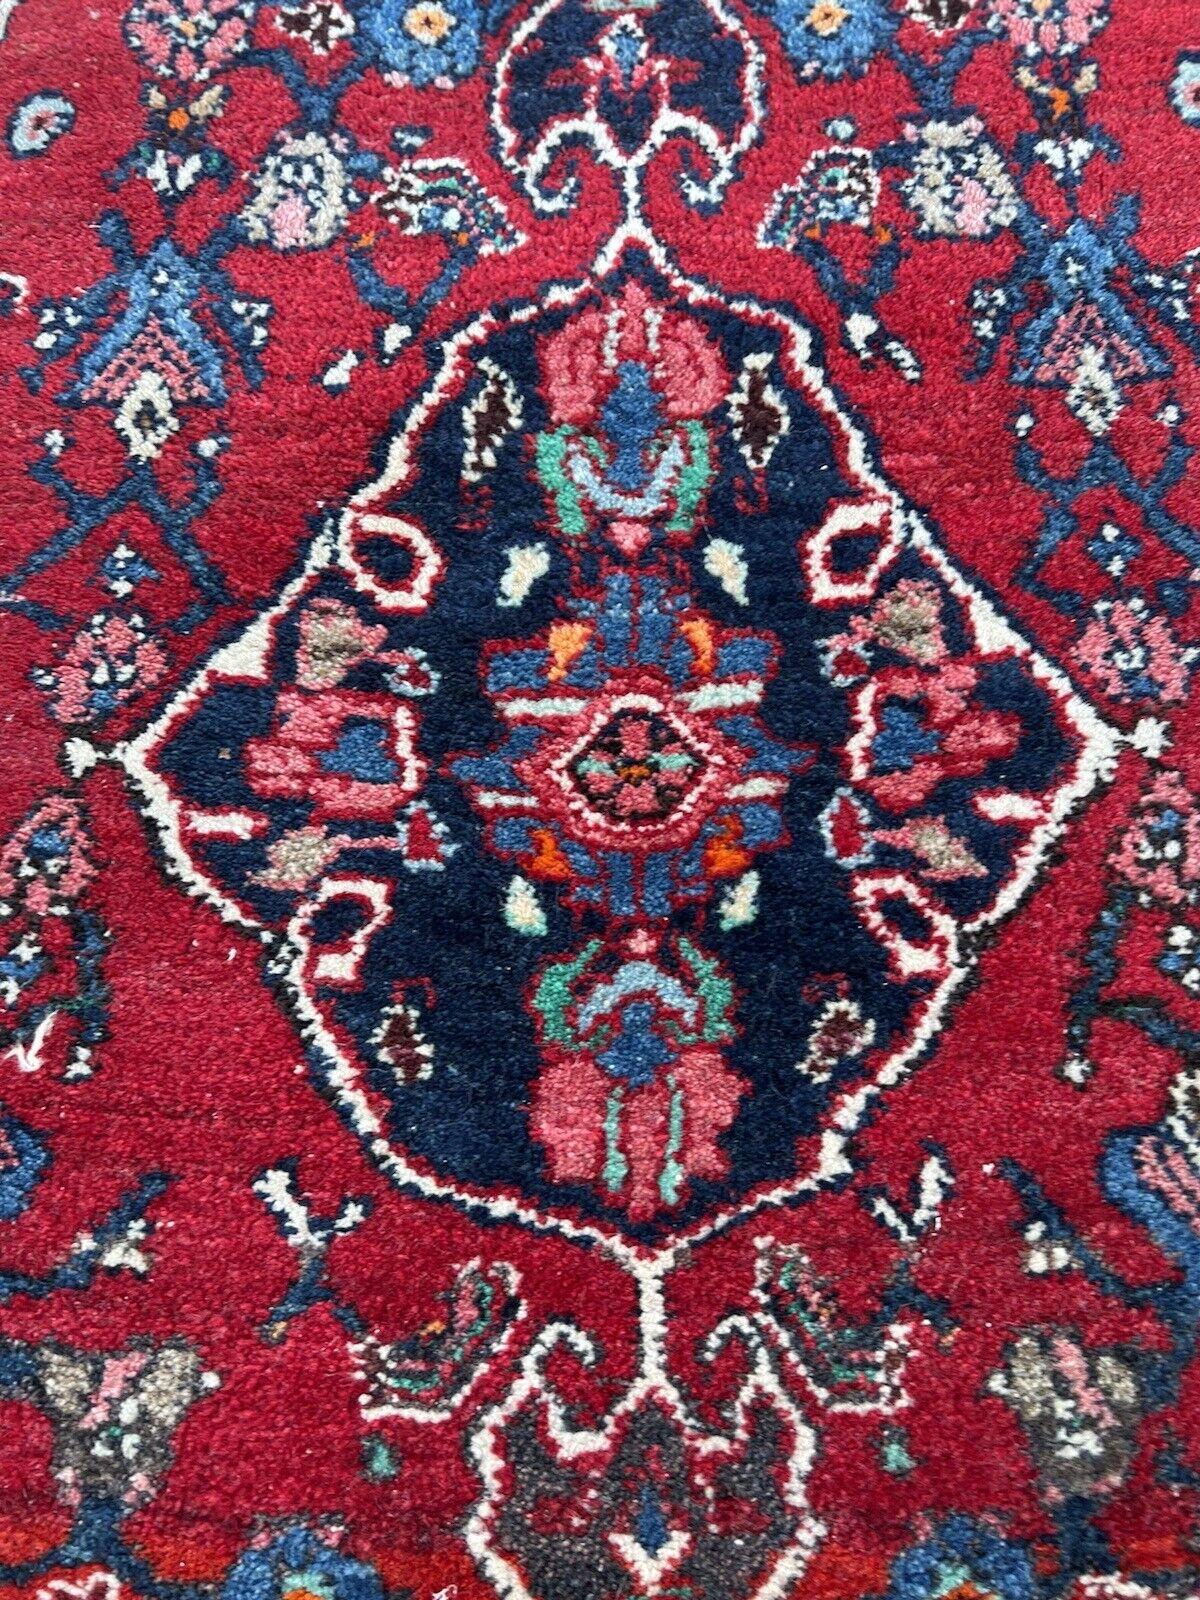 Handmade Vintage Persian Style Bidjar Rug 2.2' x 3.7', 1970s - 1S61 In Good Condition For Sale In Bordeaux, FR